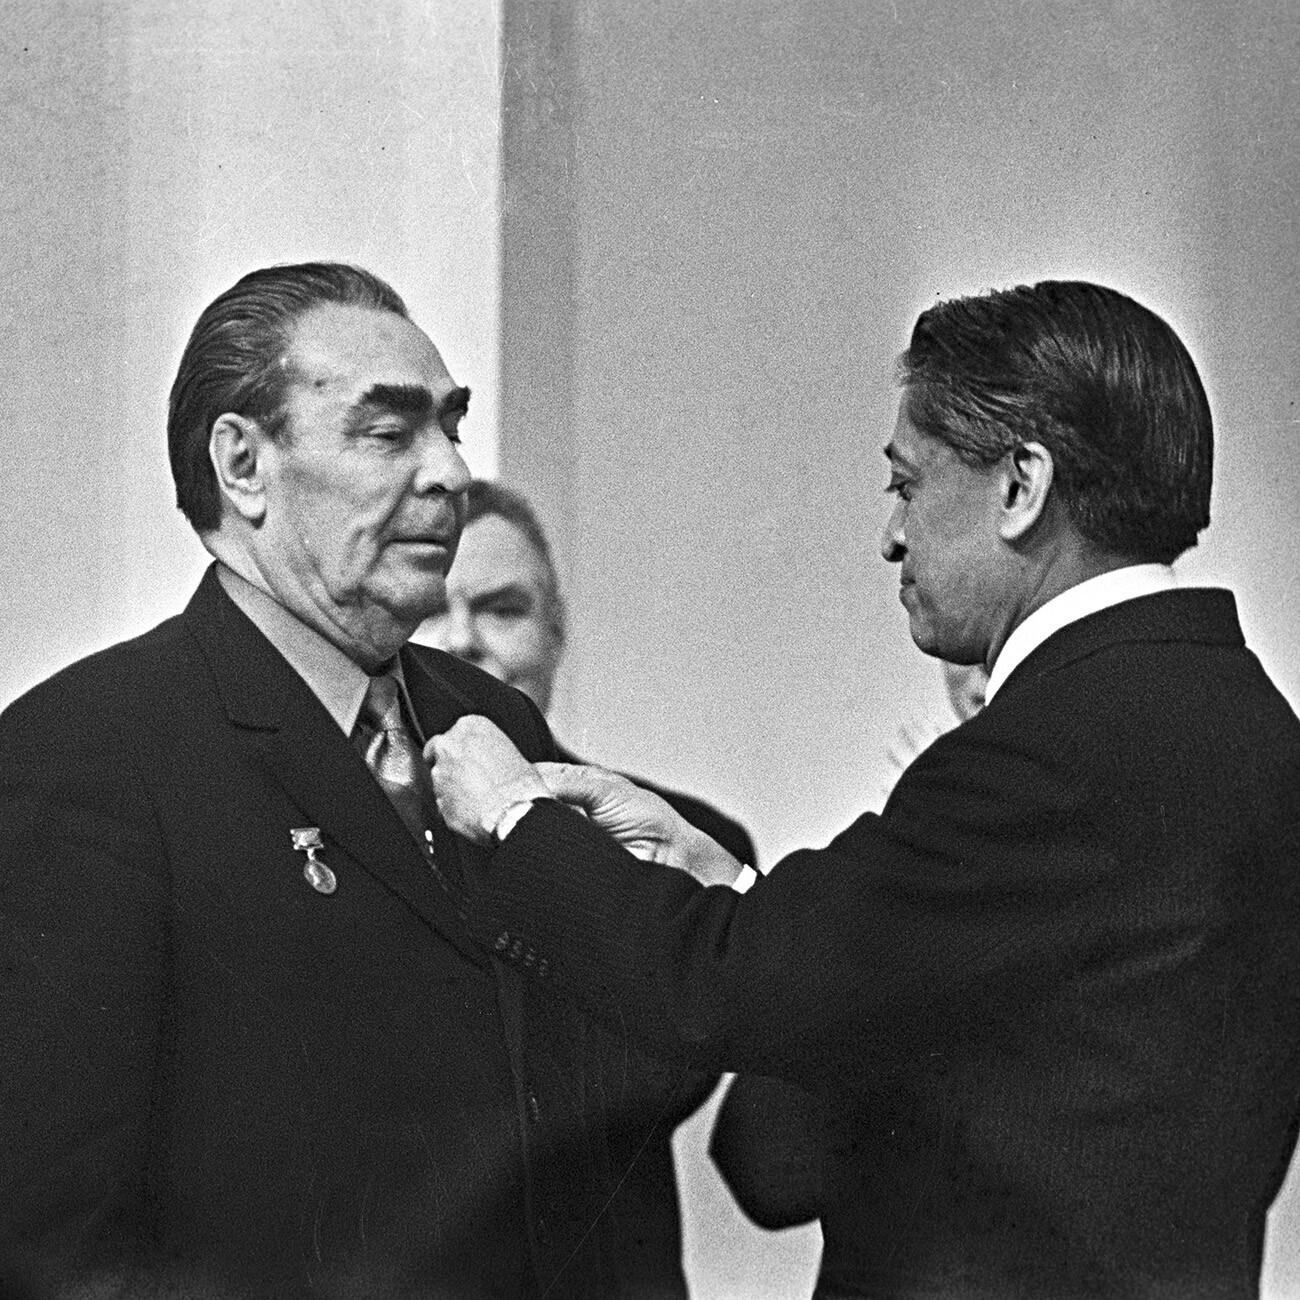 Romesh Chandra presenting Leonid Brezhnev with the Gold Medal of Peace in 1975.